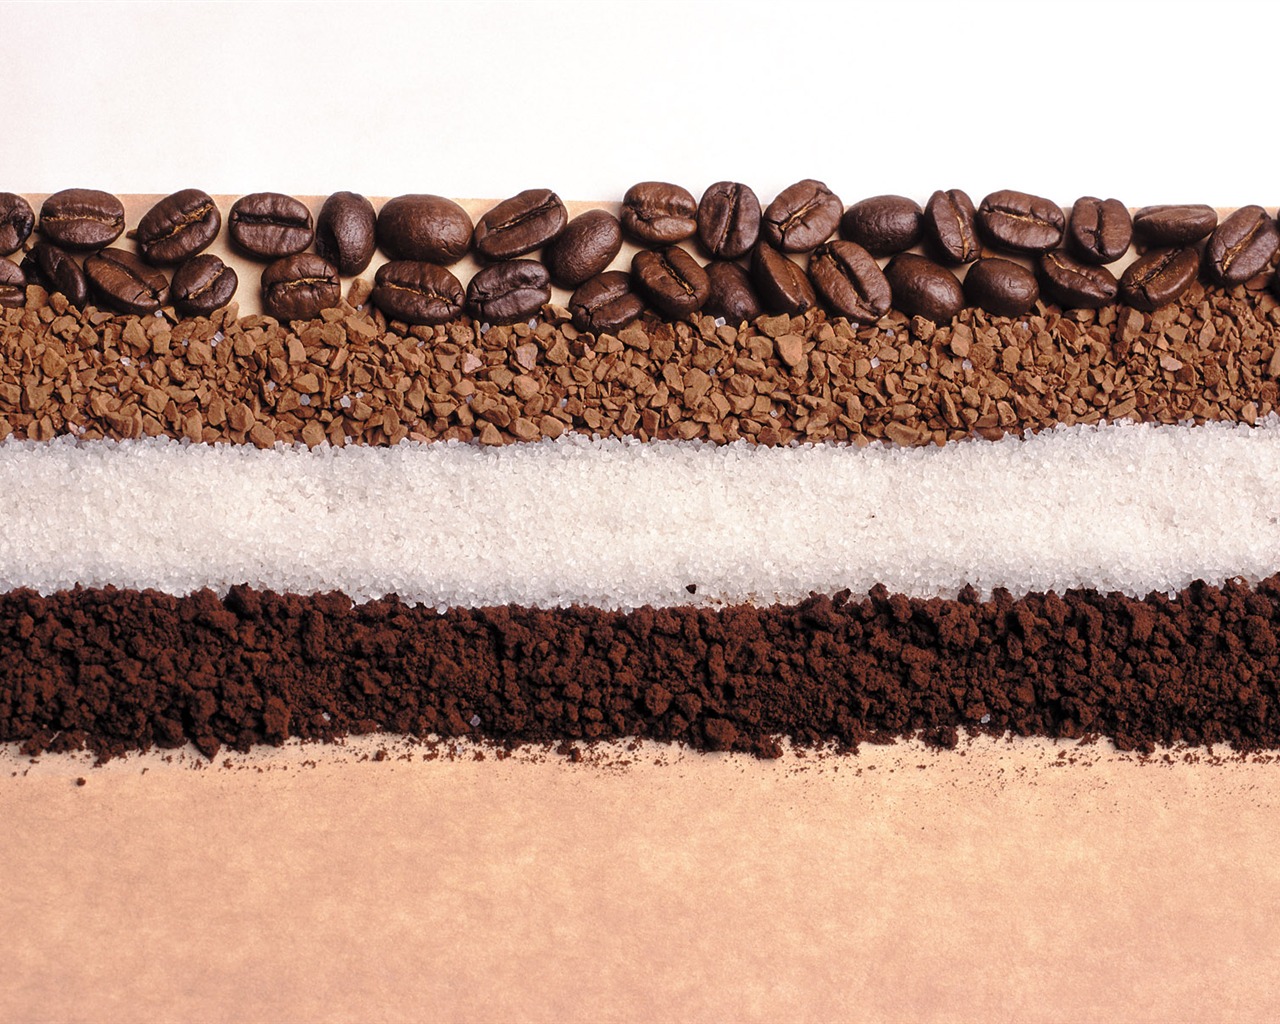 Coffee feature wallpaper (6) #15 - 1280x1024